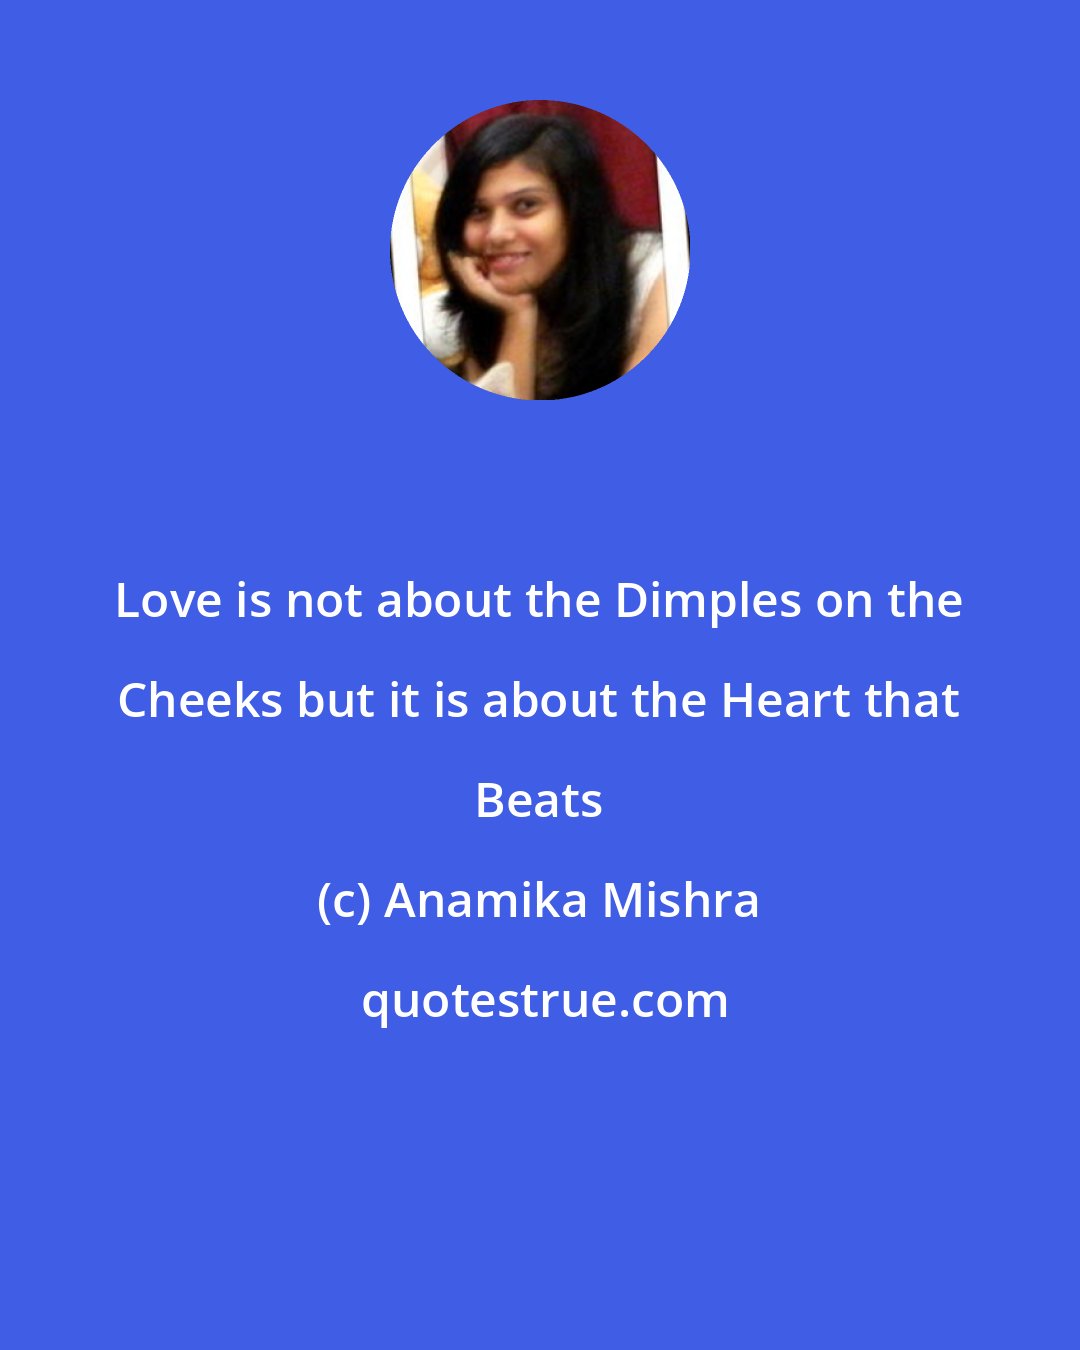 Anamika Mishra: Love is not about the Dimples on the Cheeks but it is about the Heart that Beats